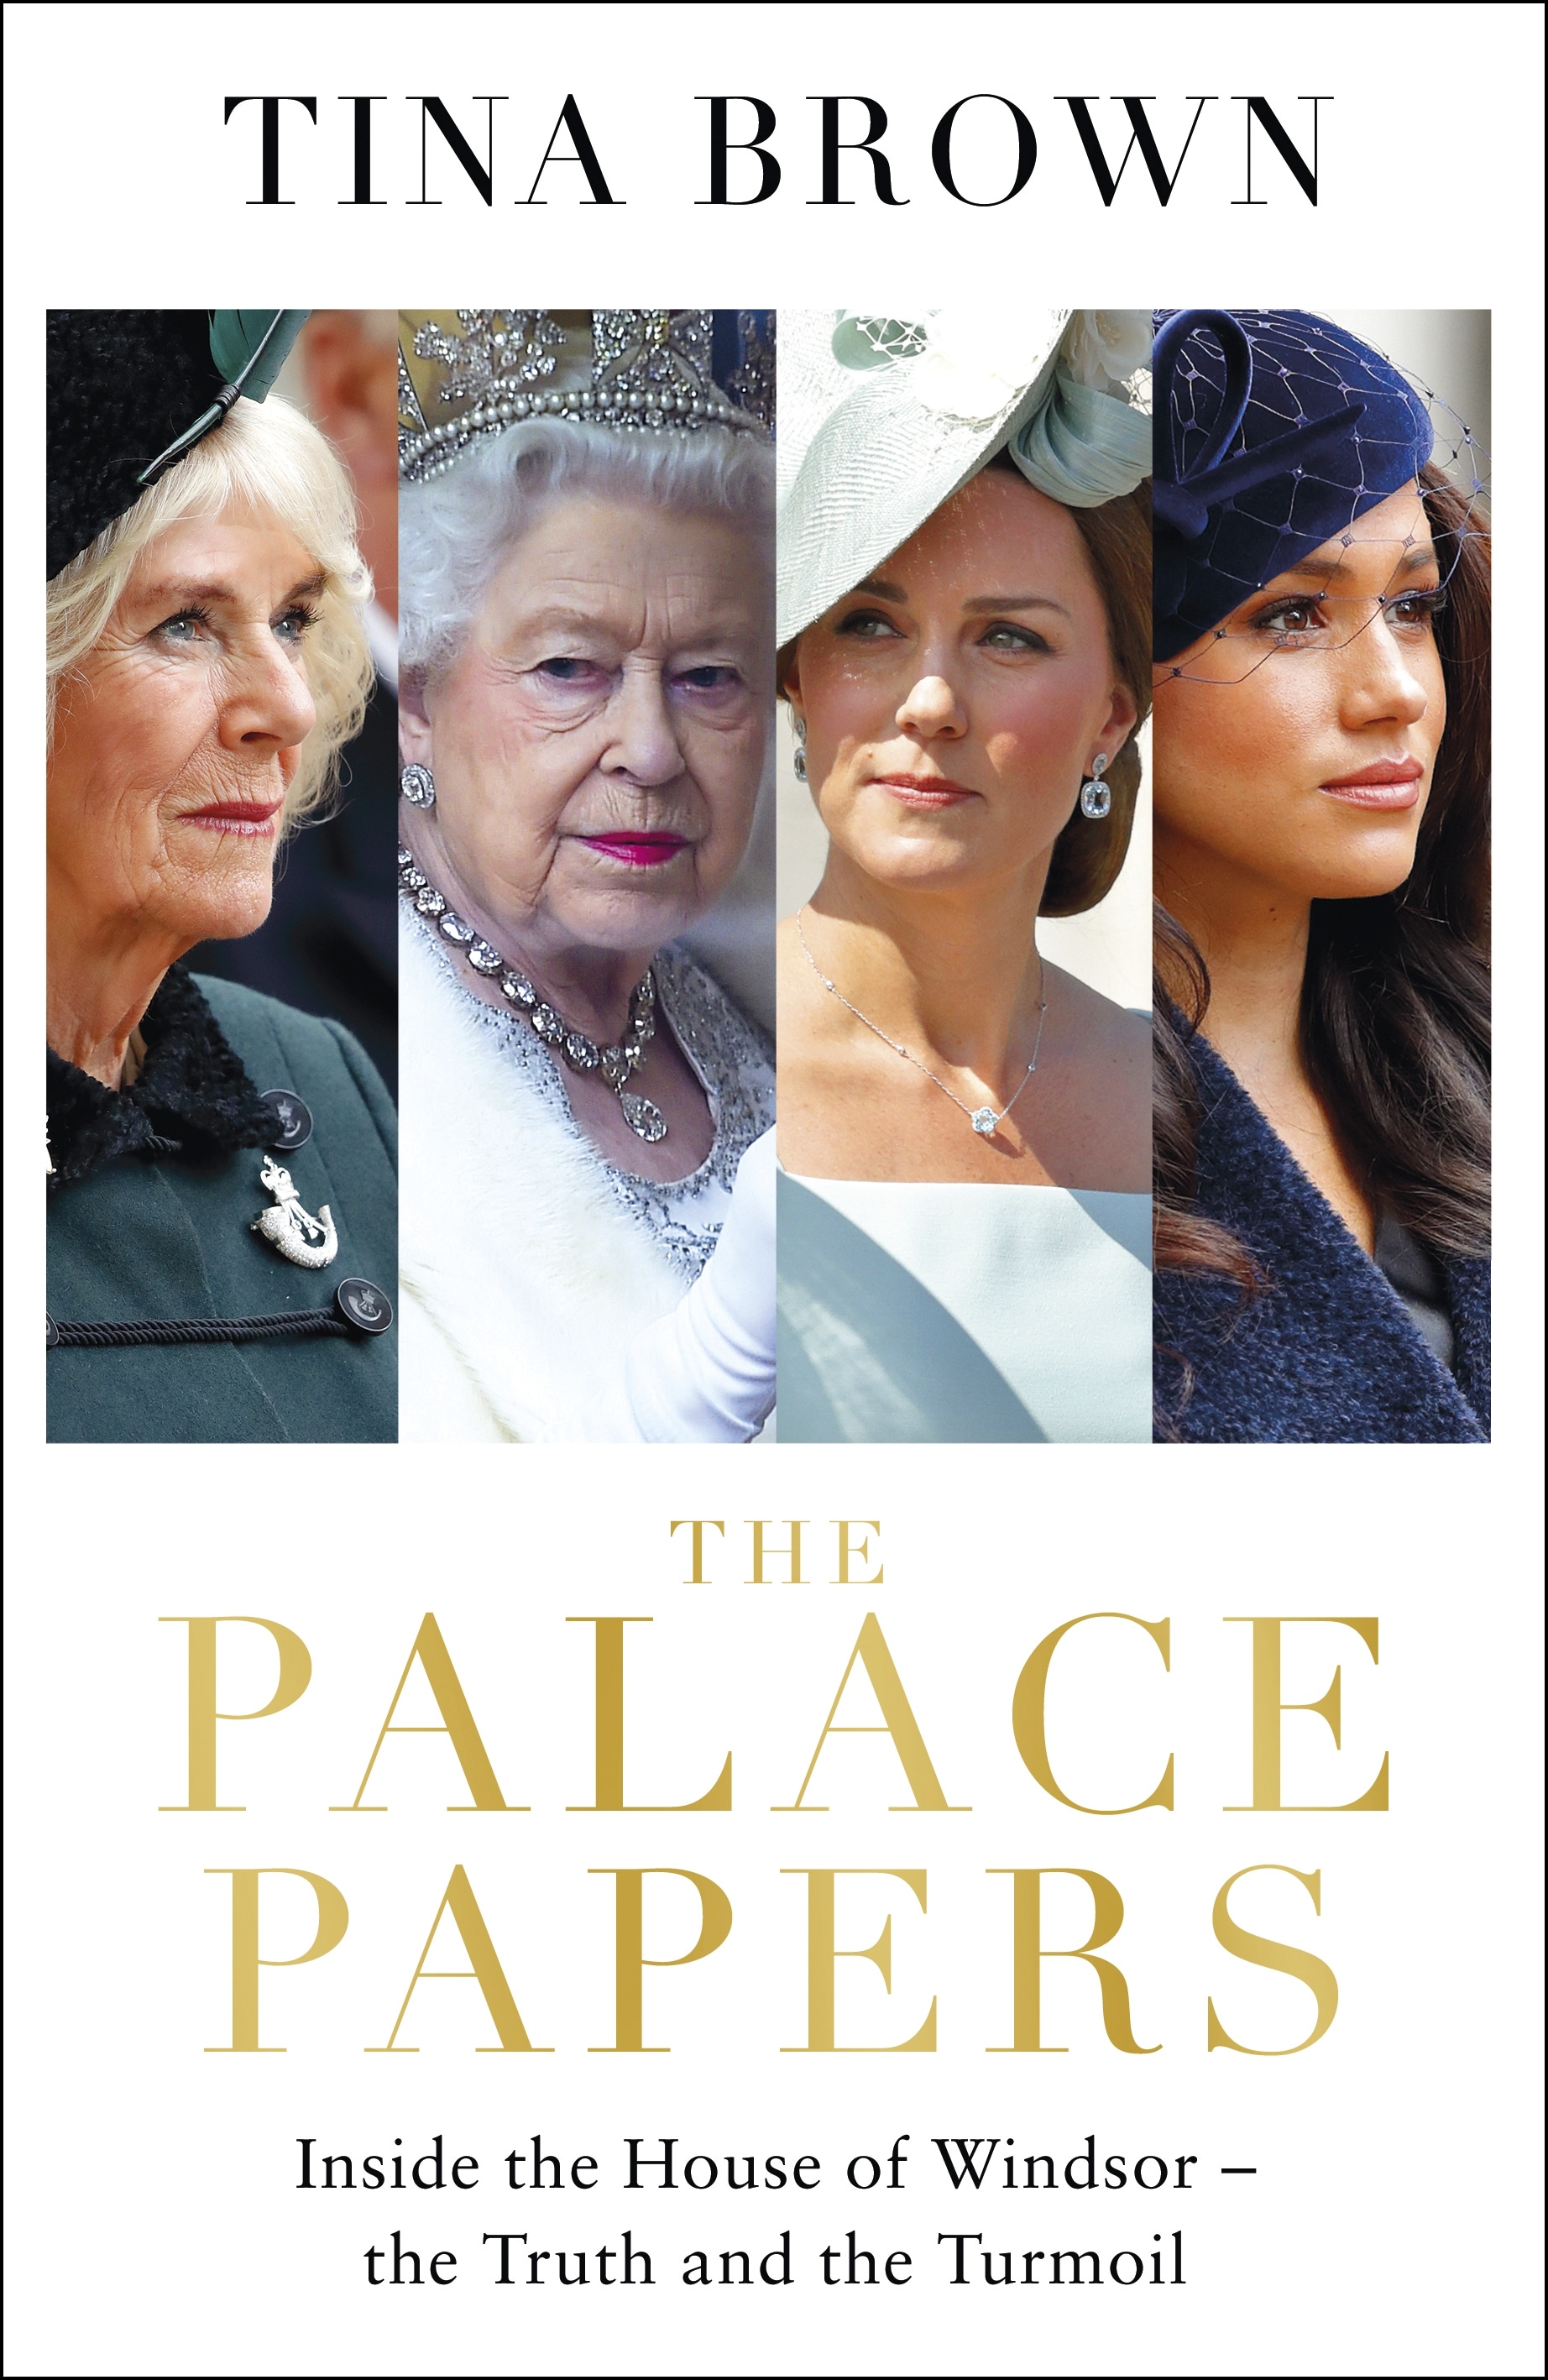 Book “The Palace Papers” by Tina Brown — April 12, 2022